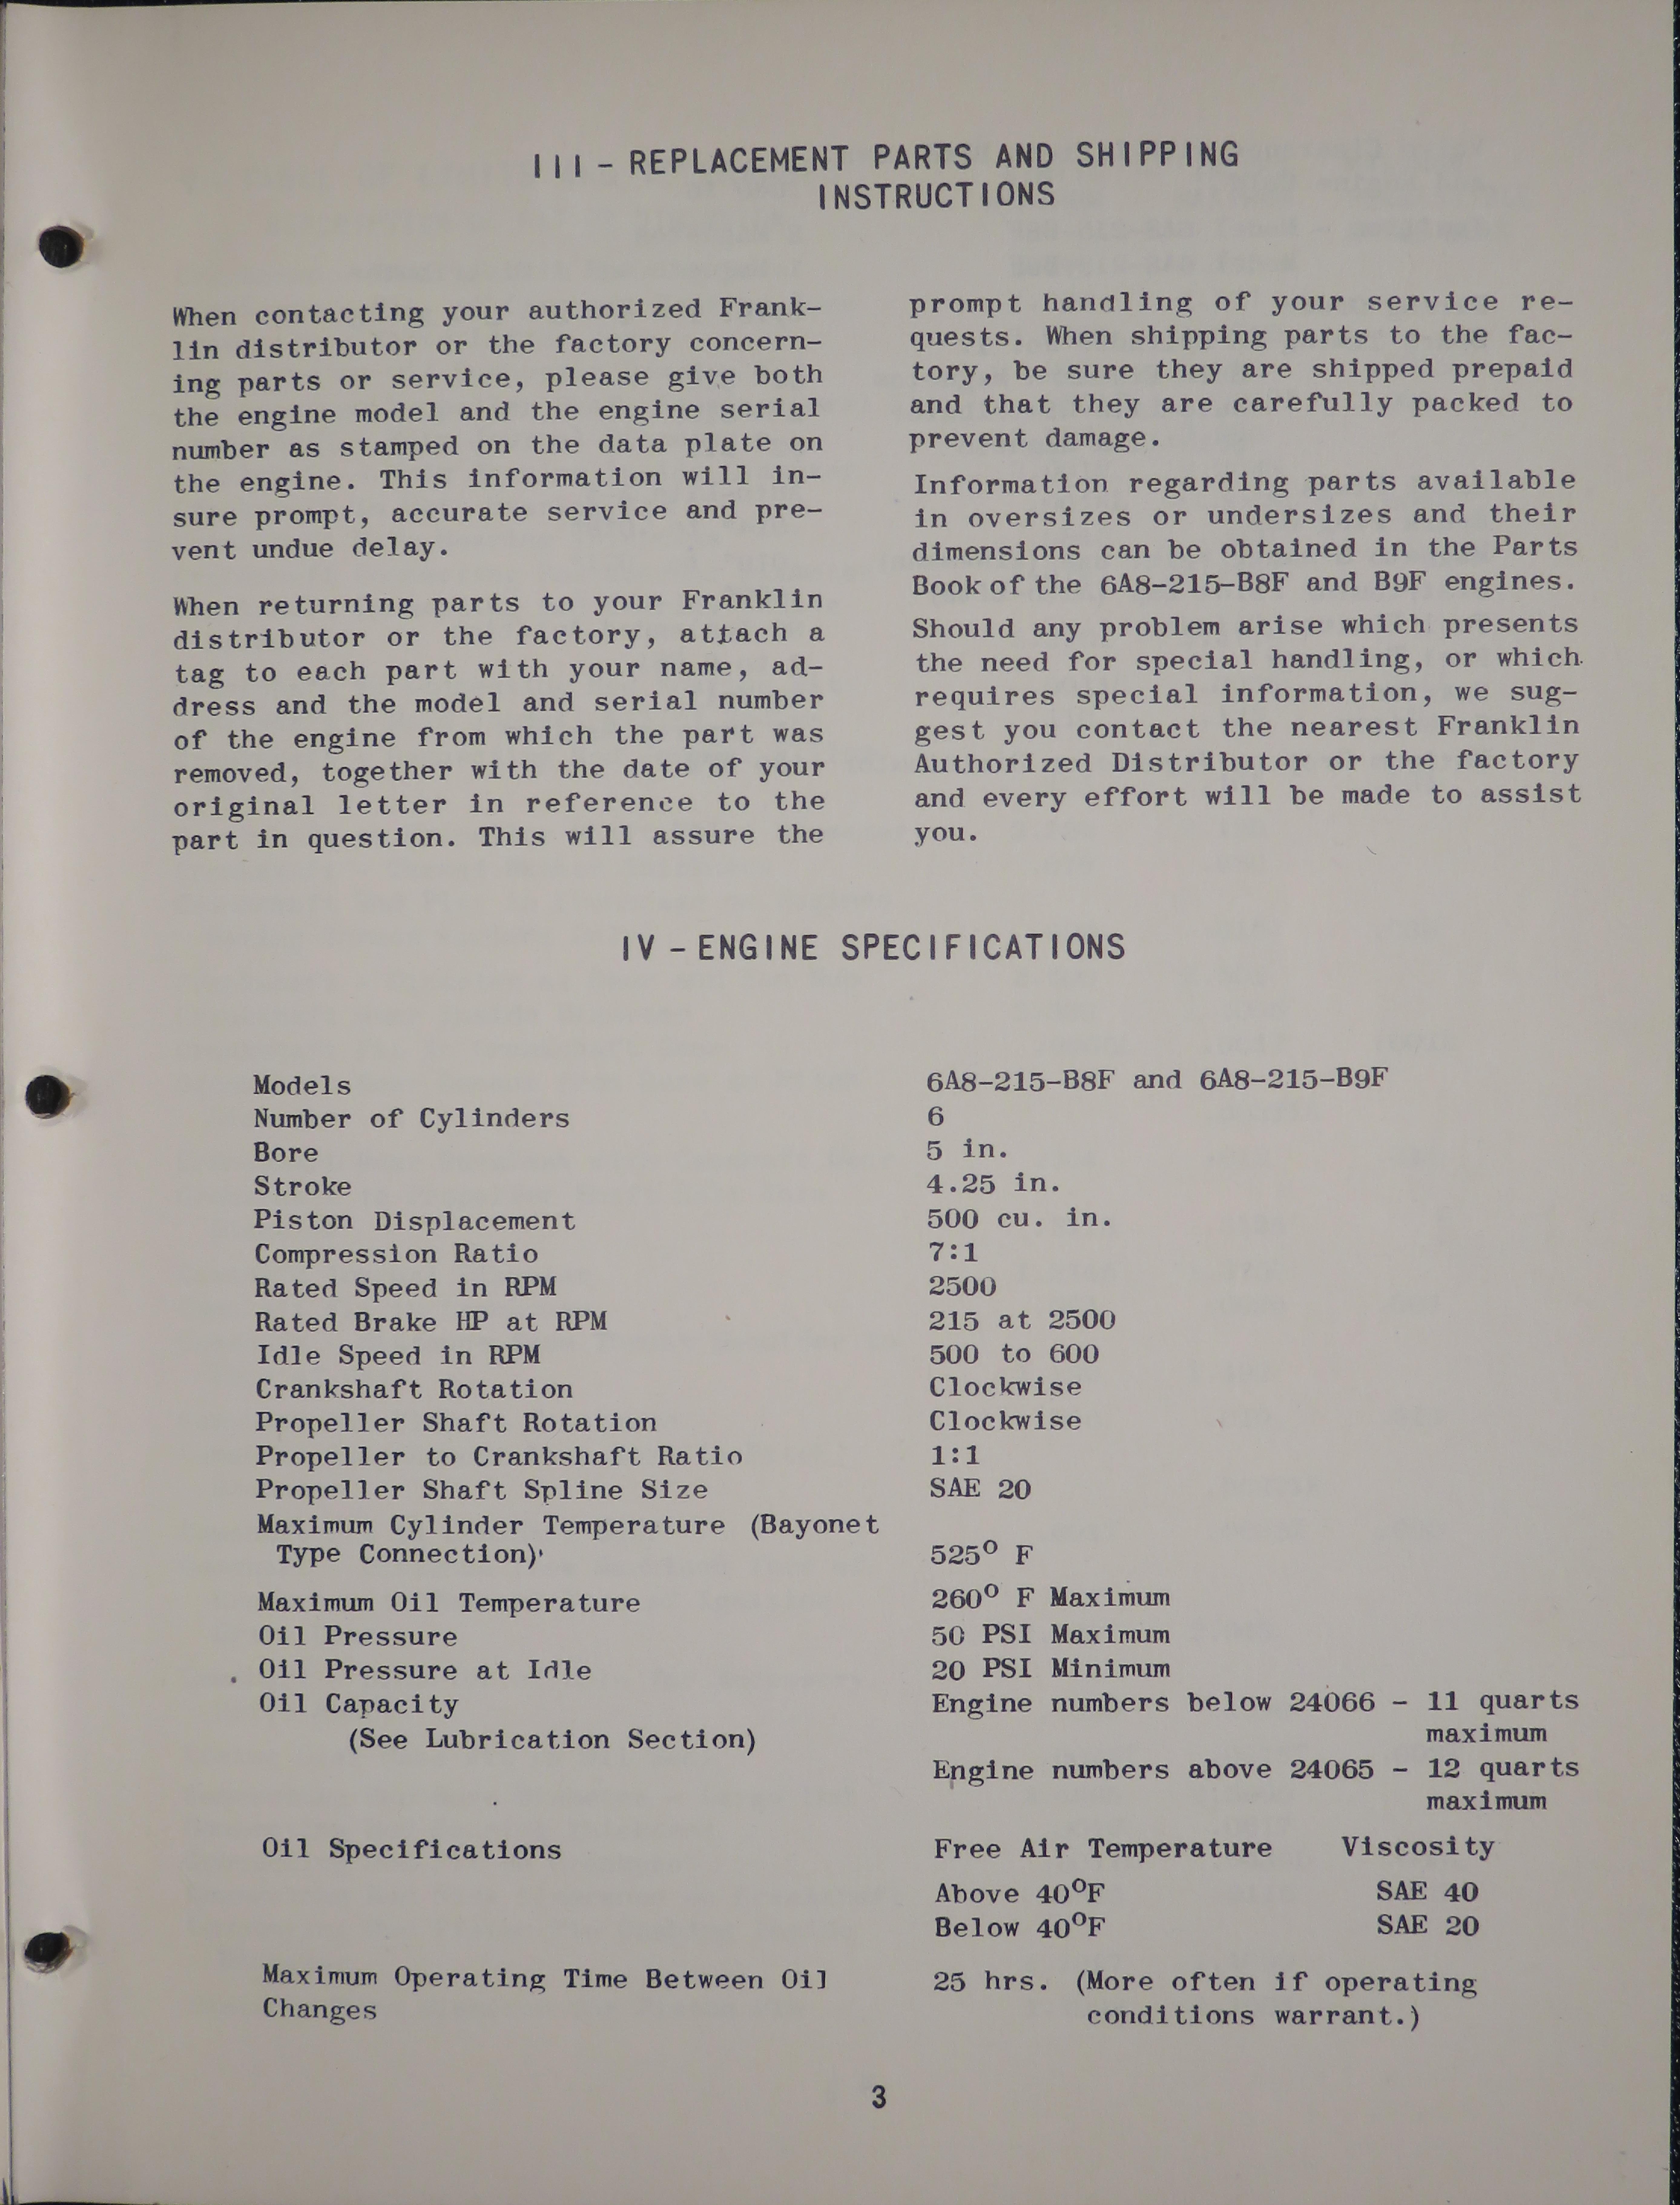 Sample page 9 from AirCorps Library document: Service Manual for Models 6A8-215-B8F and B9F Engines